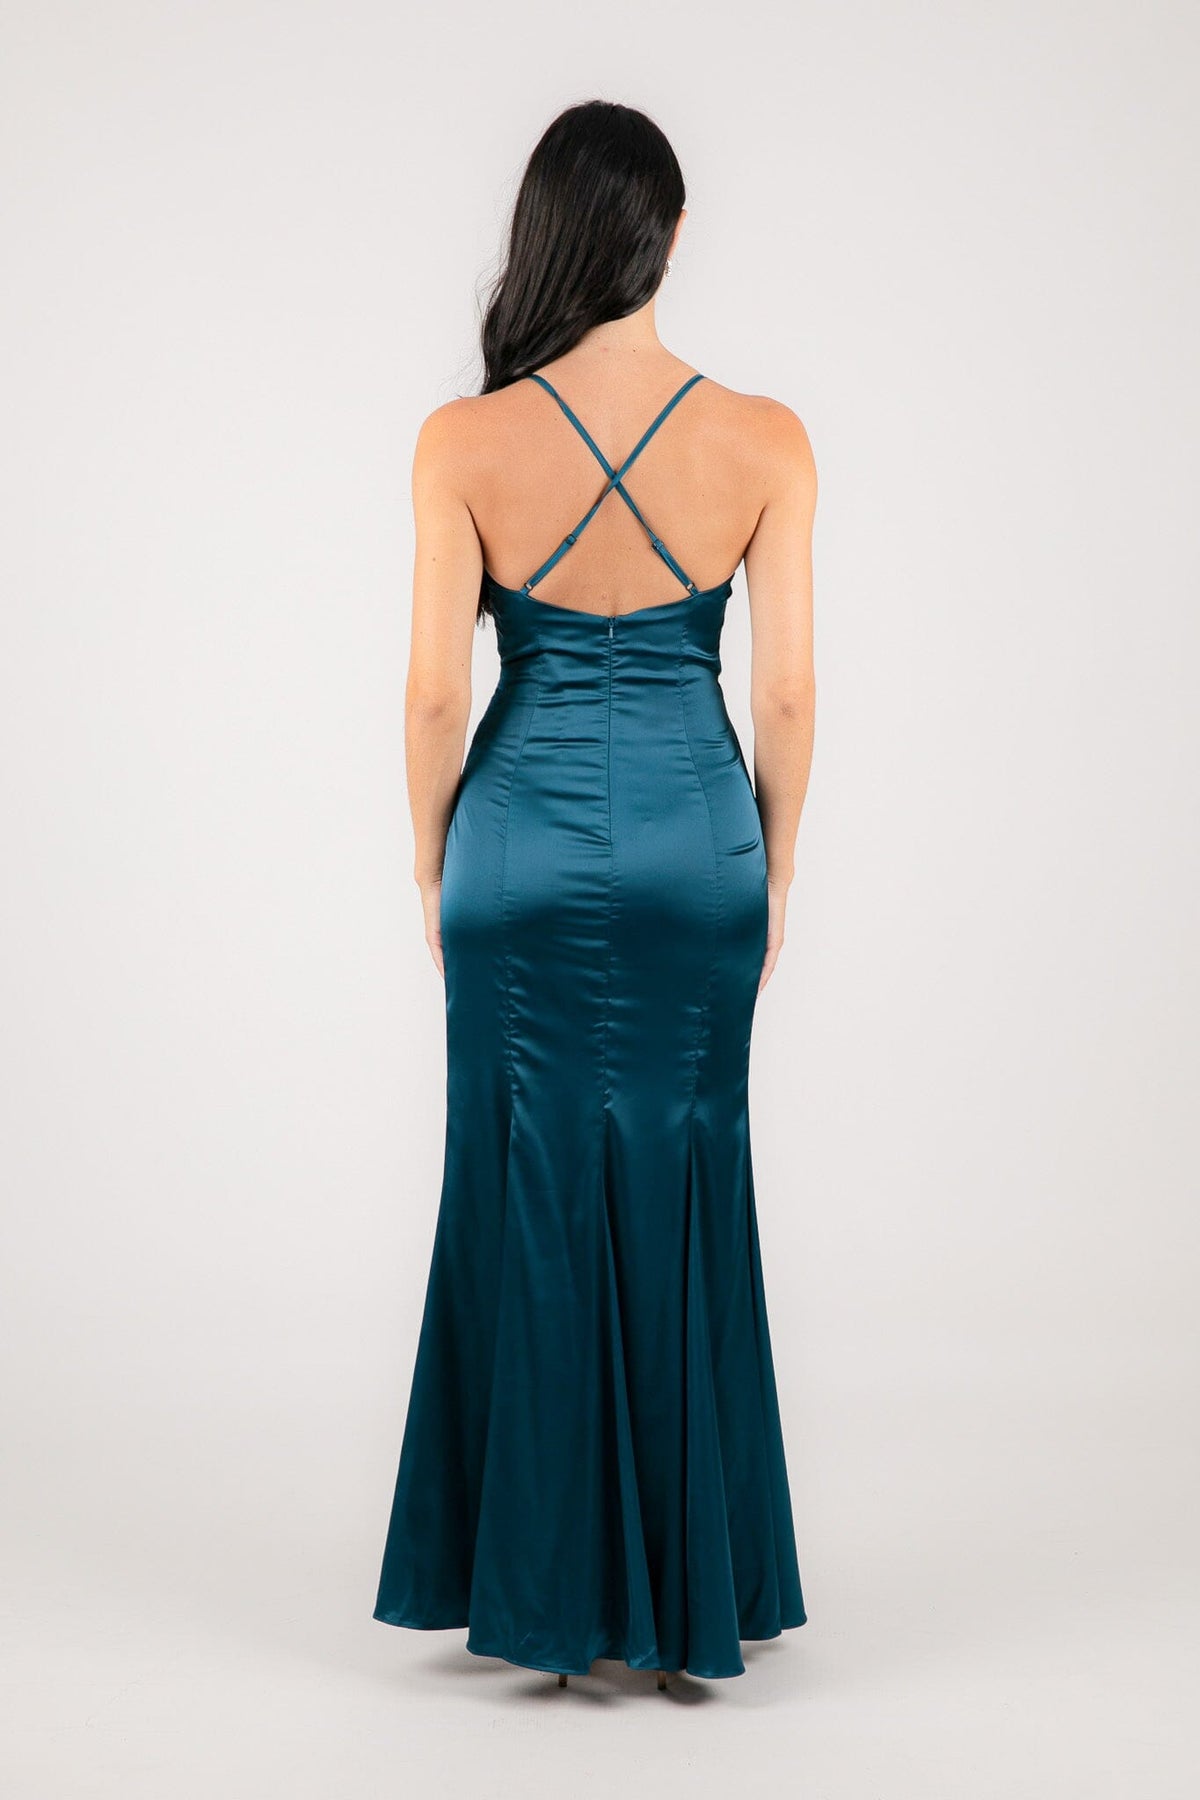 Adjustable Crisscross Straps on Open Back of Satin Maxi Dress with V Neckline and Front Split in Teal Green